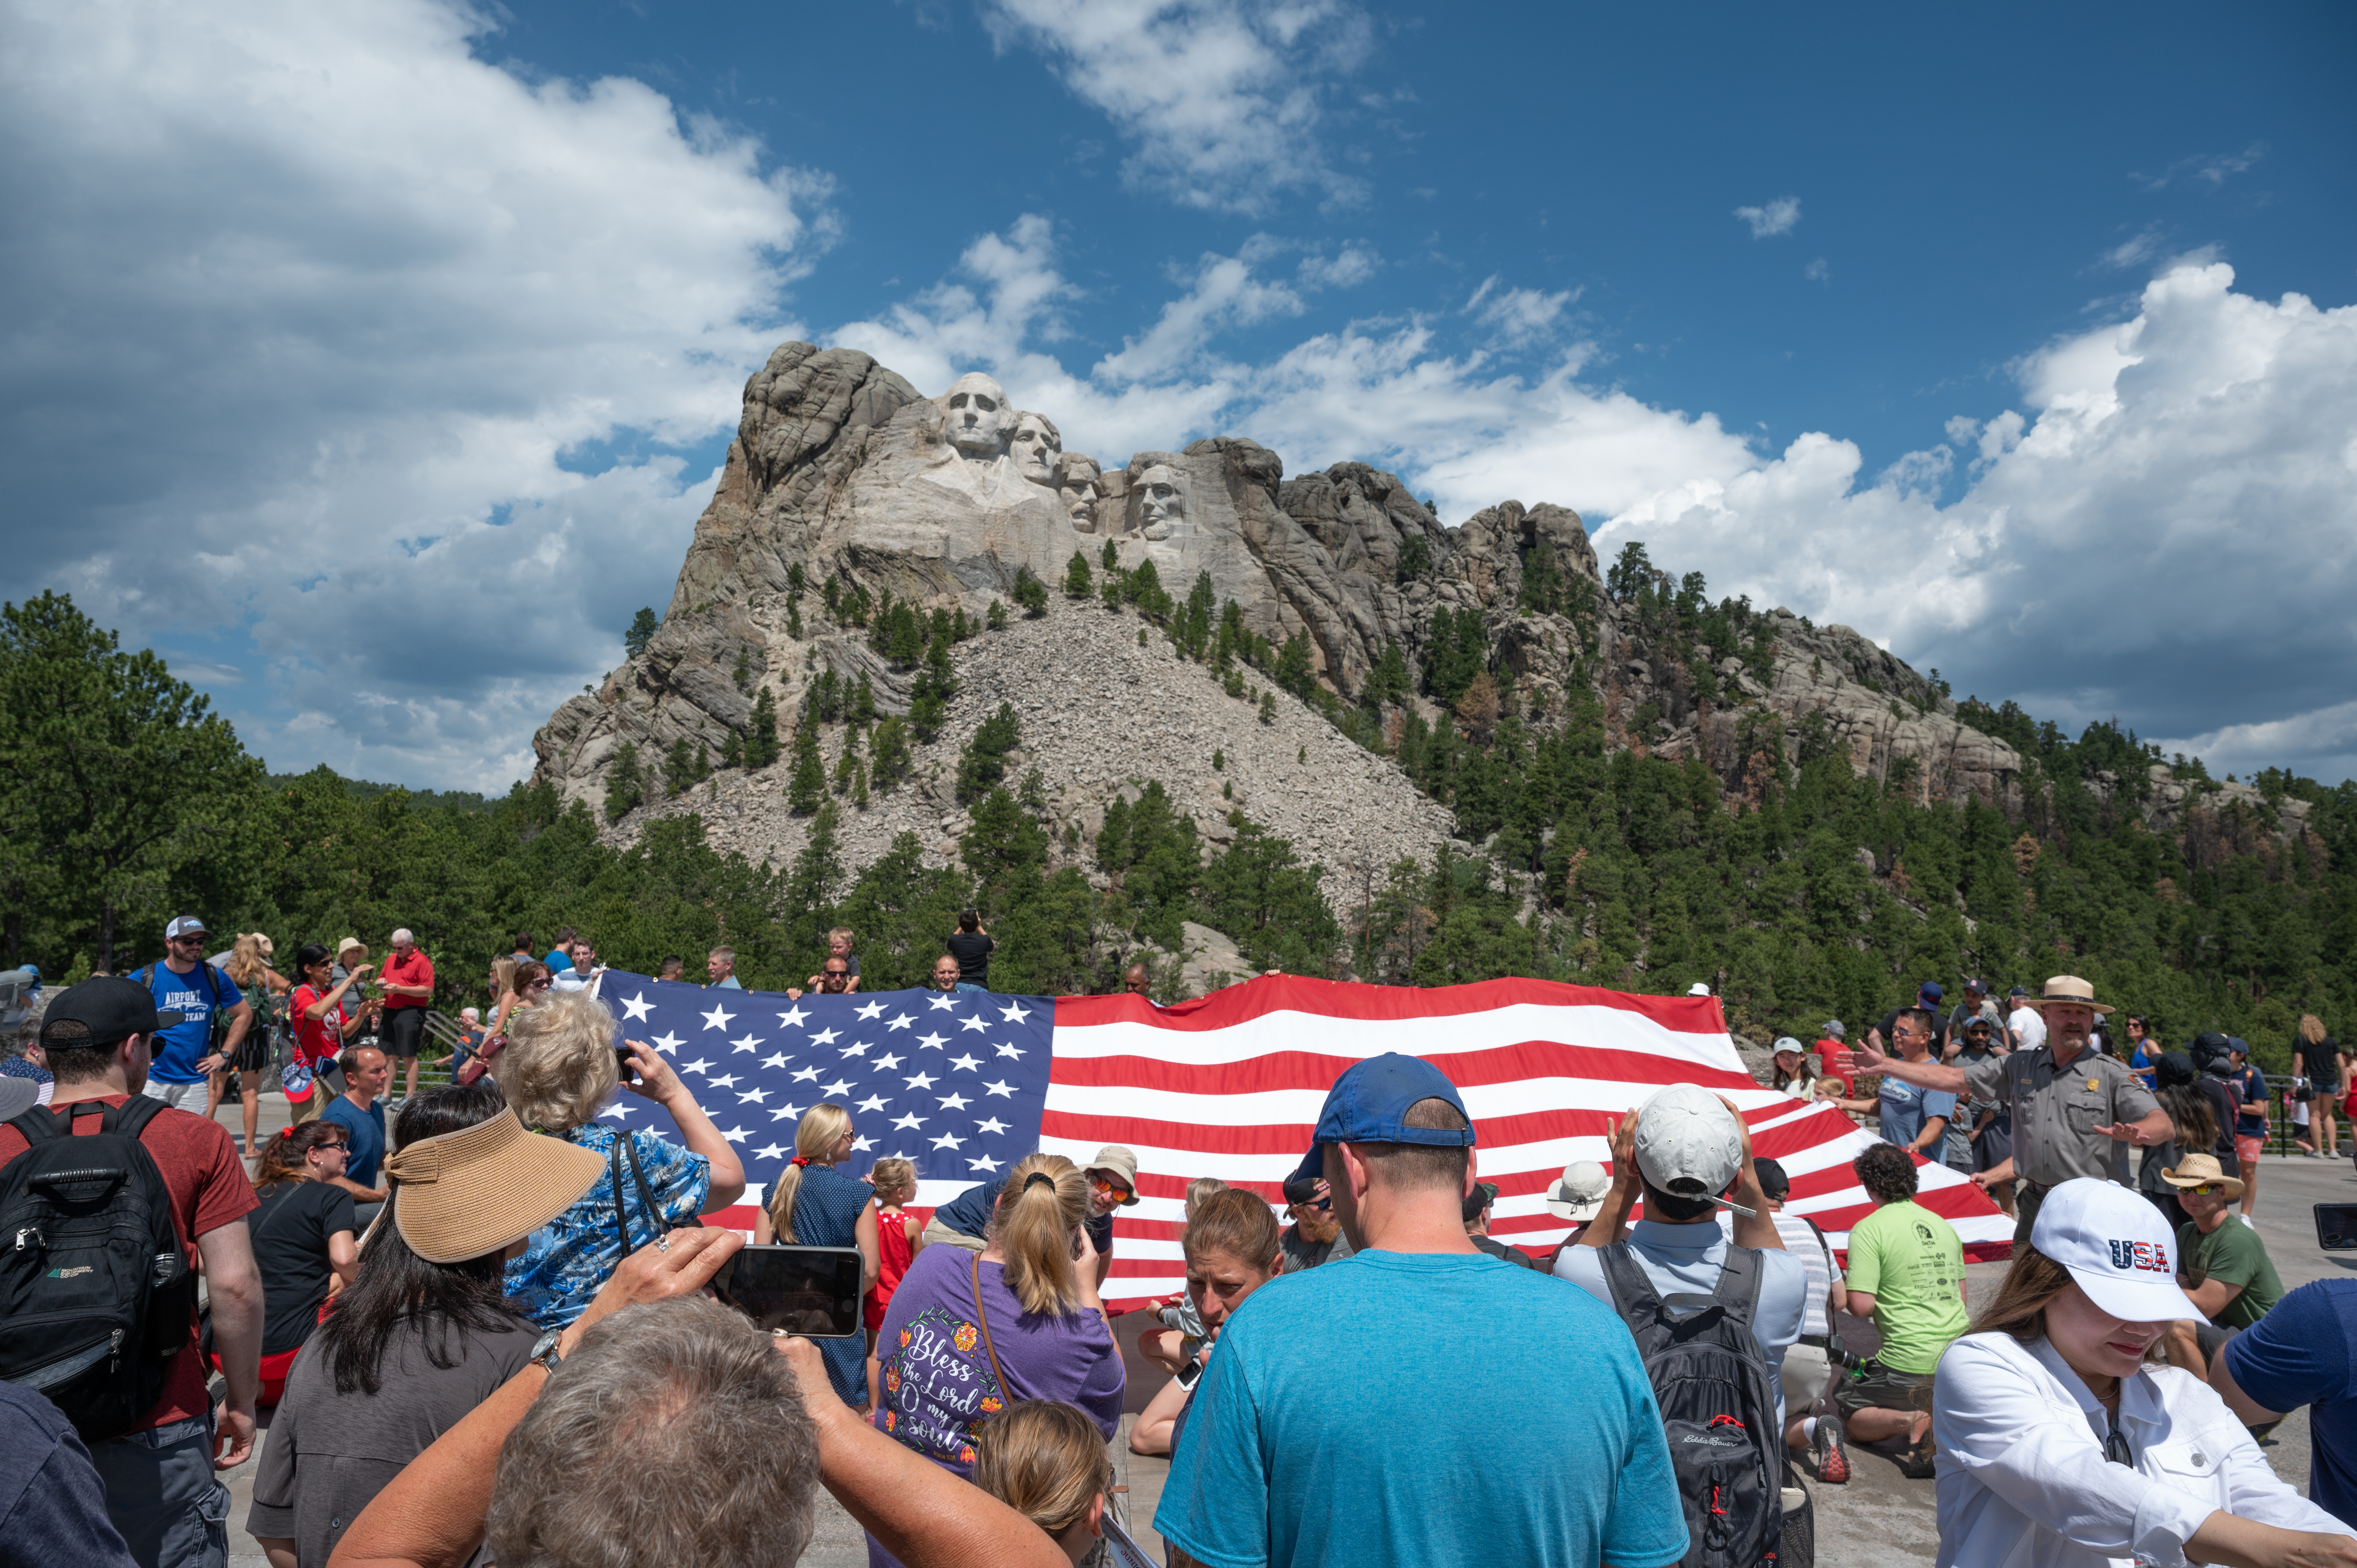 Crowd of people standing with a large American flag in front of Mount Rushmore.